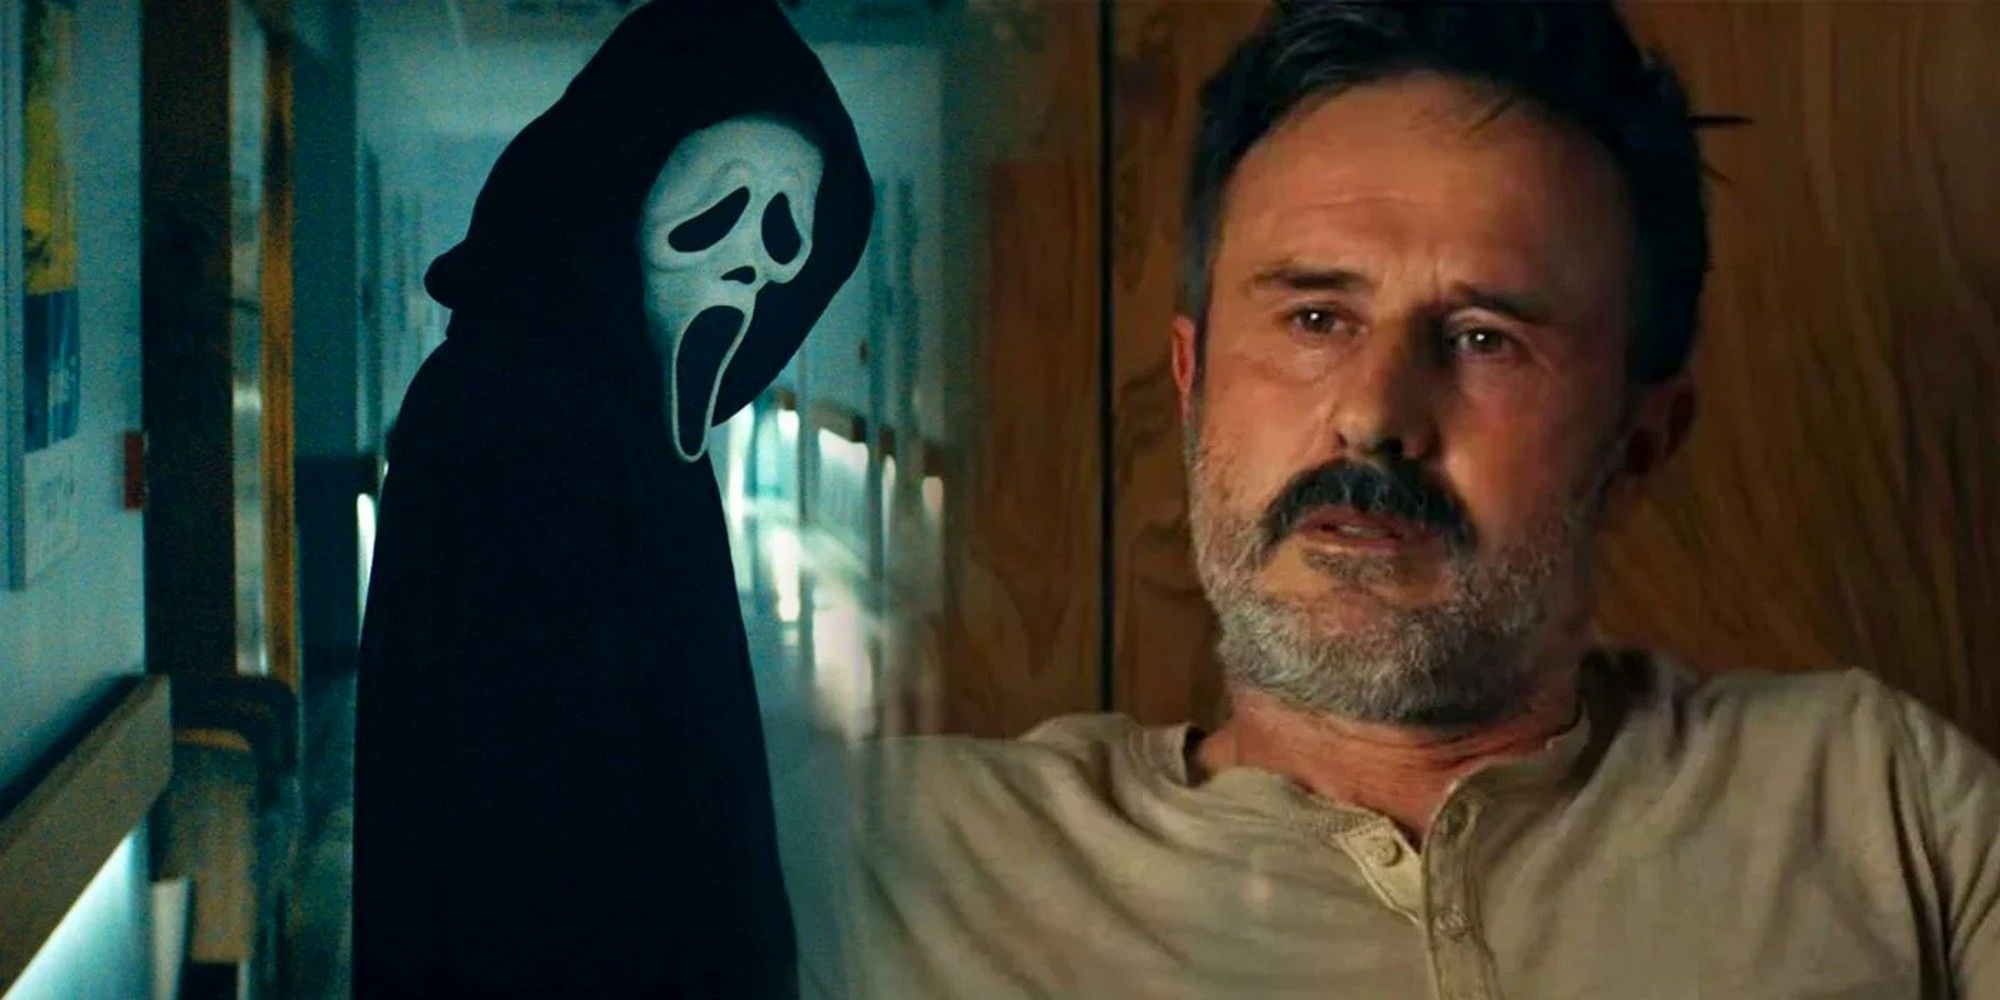 David Arquette as Dewey and Ghostface from Scream